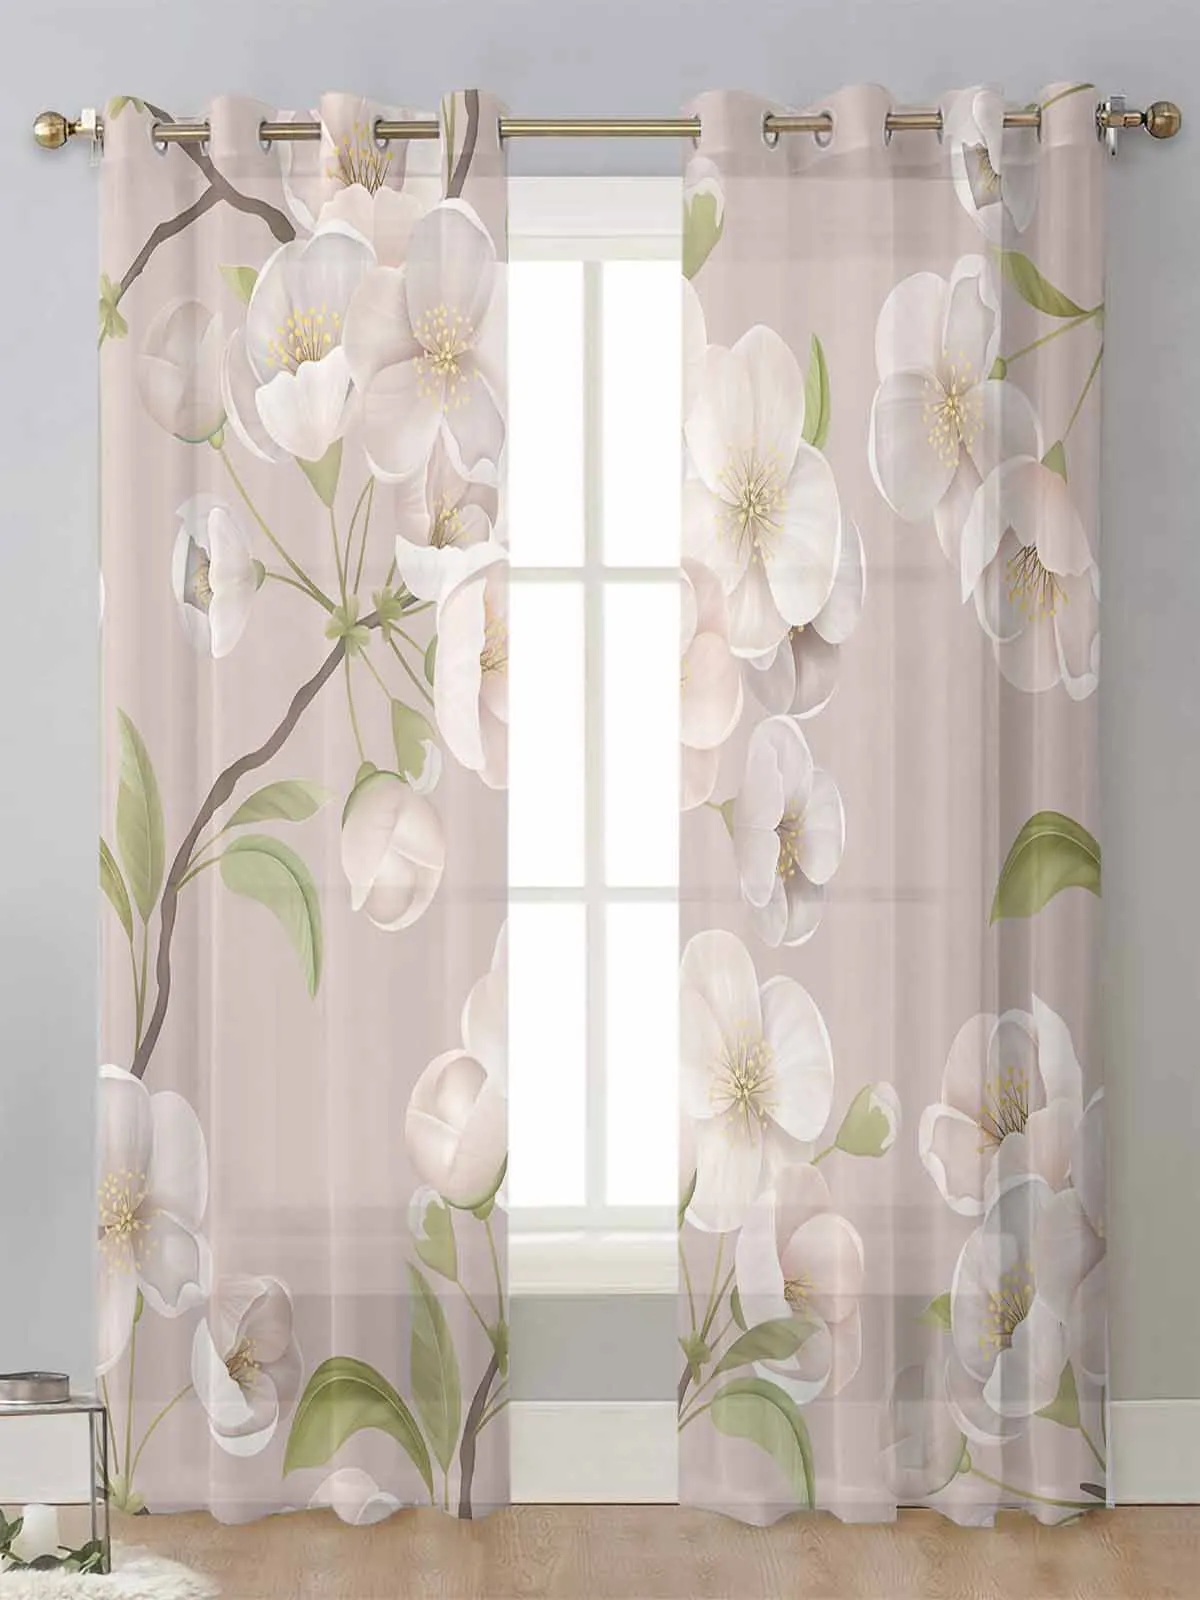 

Spring Brown Flower Peach Blossom Sheer Curtains For Living Room Window Voile Tulle Curtain Cortinas Drapes Home Decor